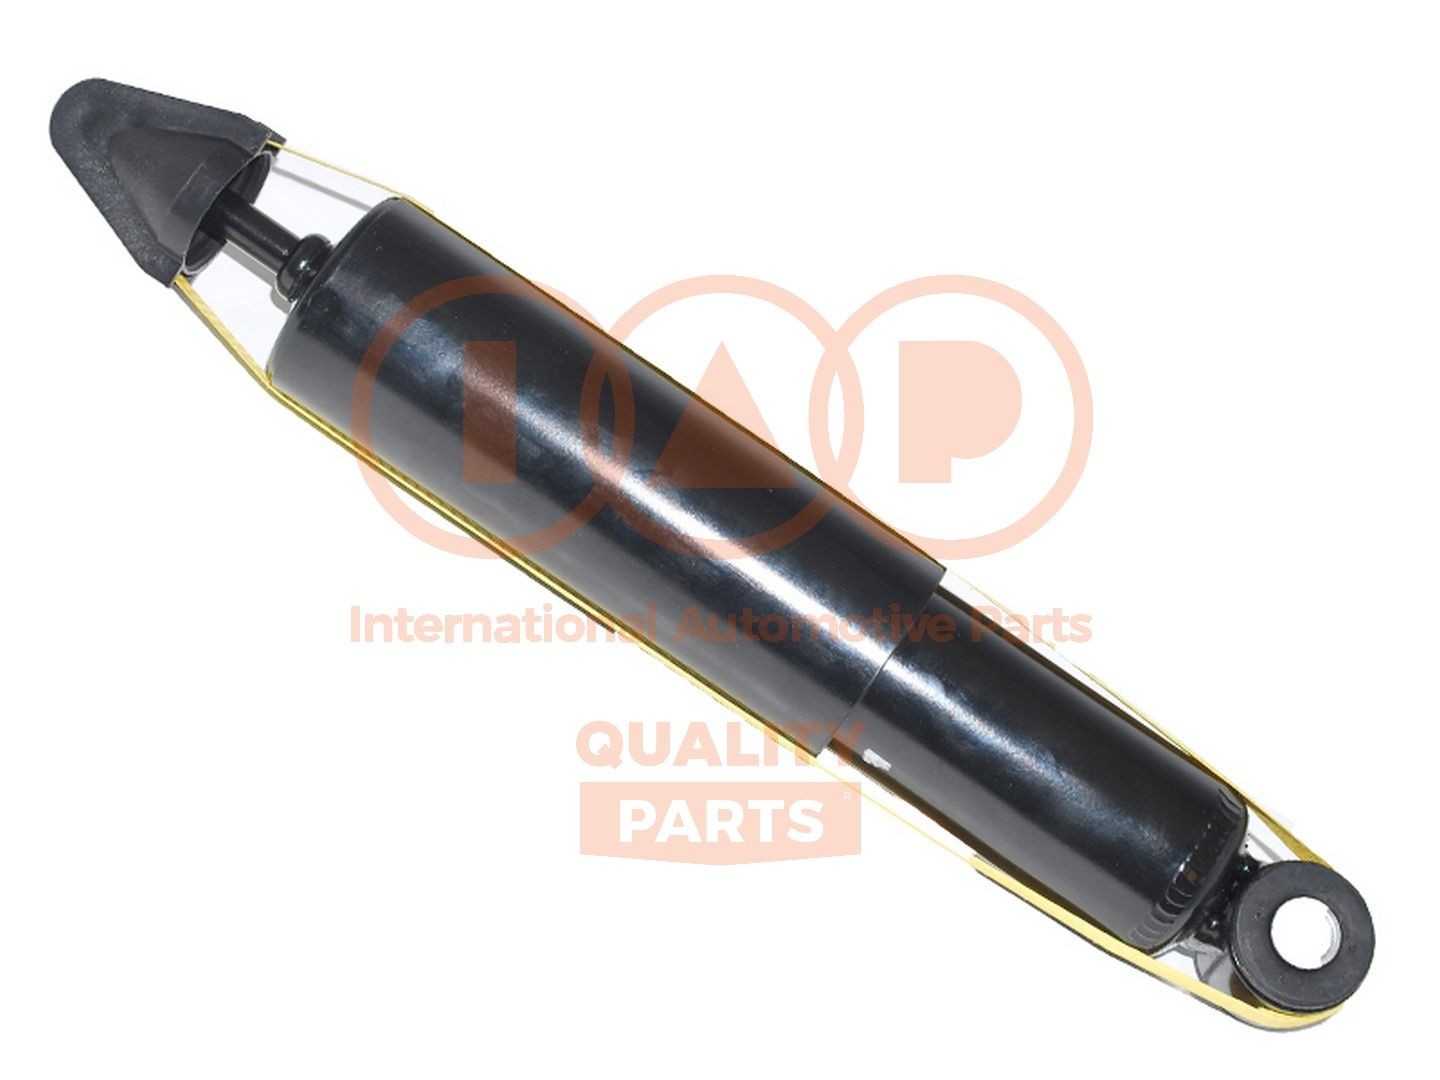 IAP QUALITY PARTS 504-13043 Shock absorber 561100X050